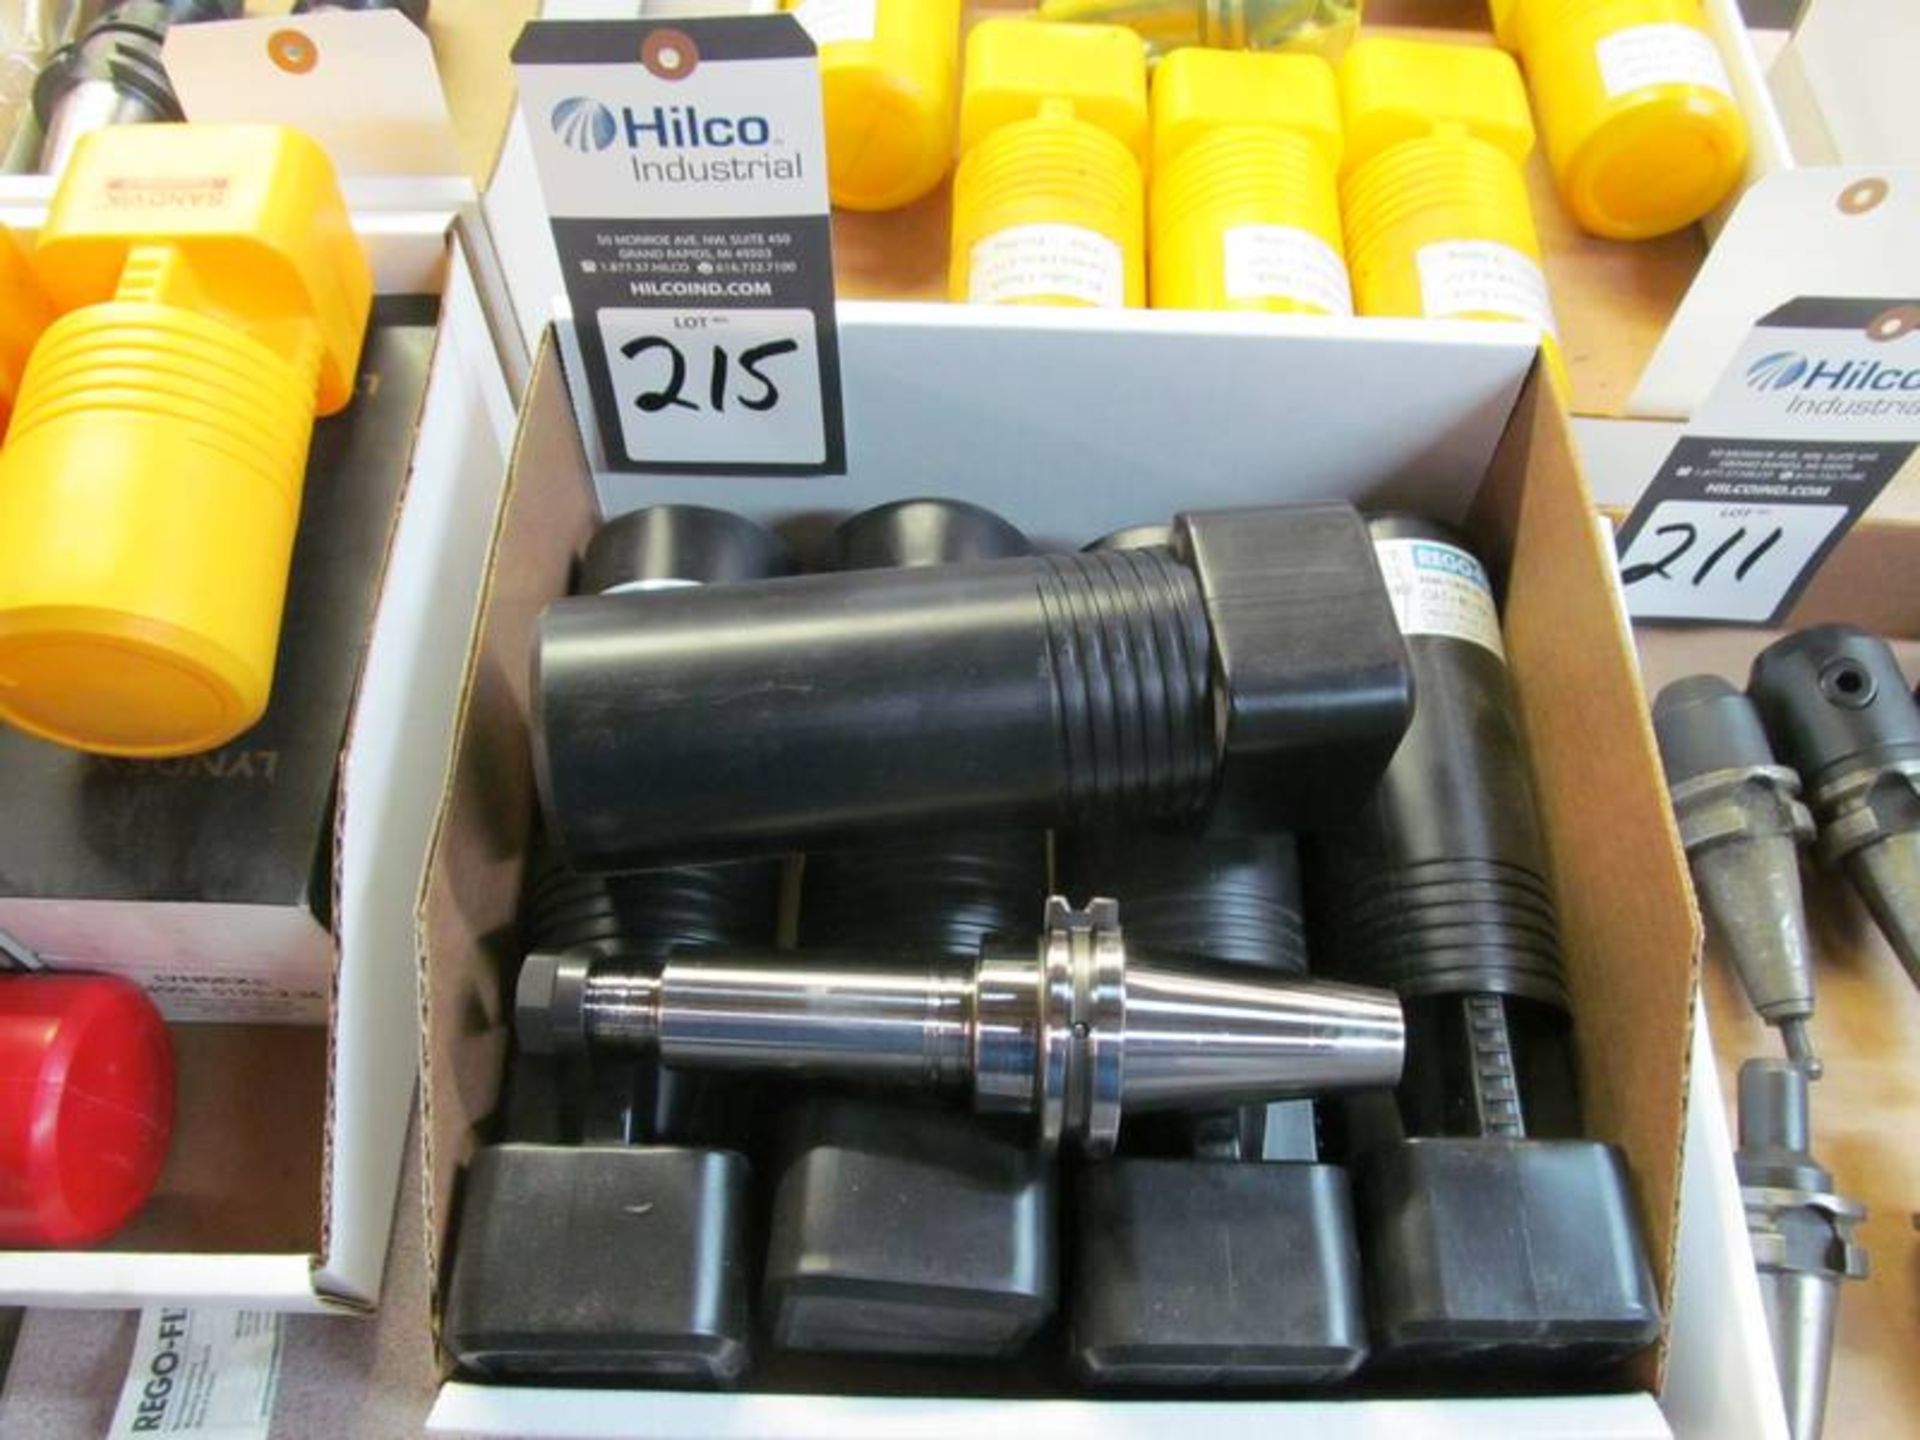 CAT40 Collet Tool Holders